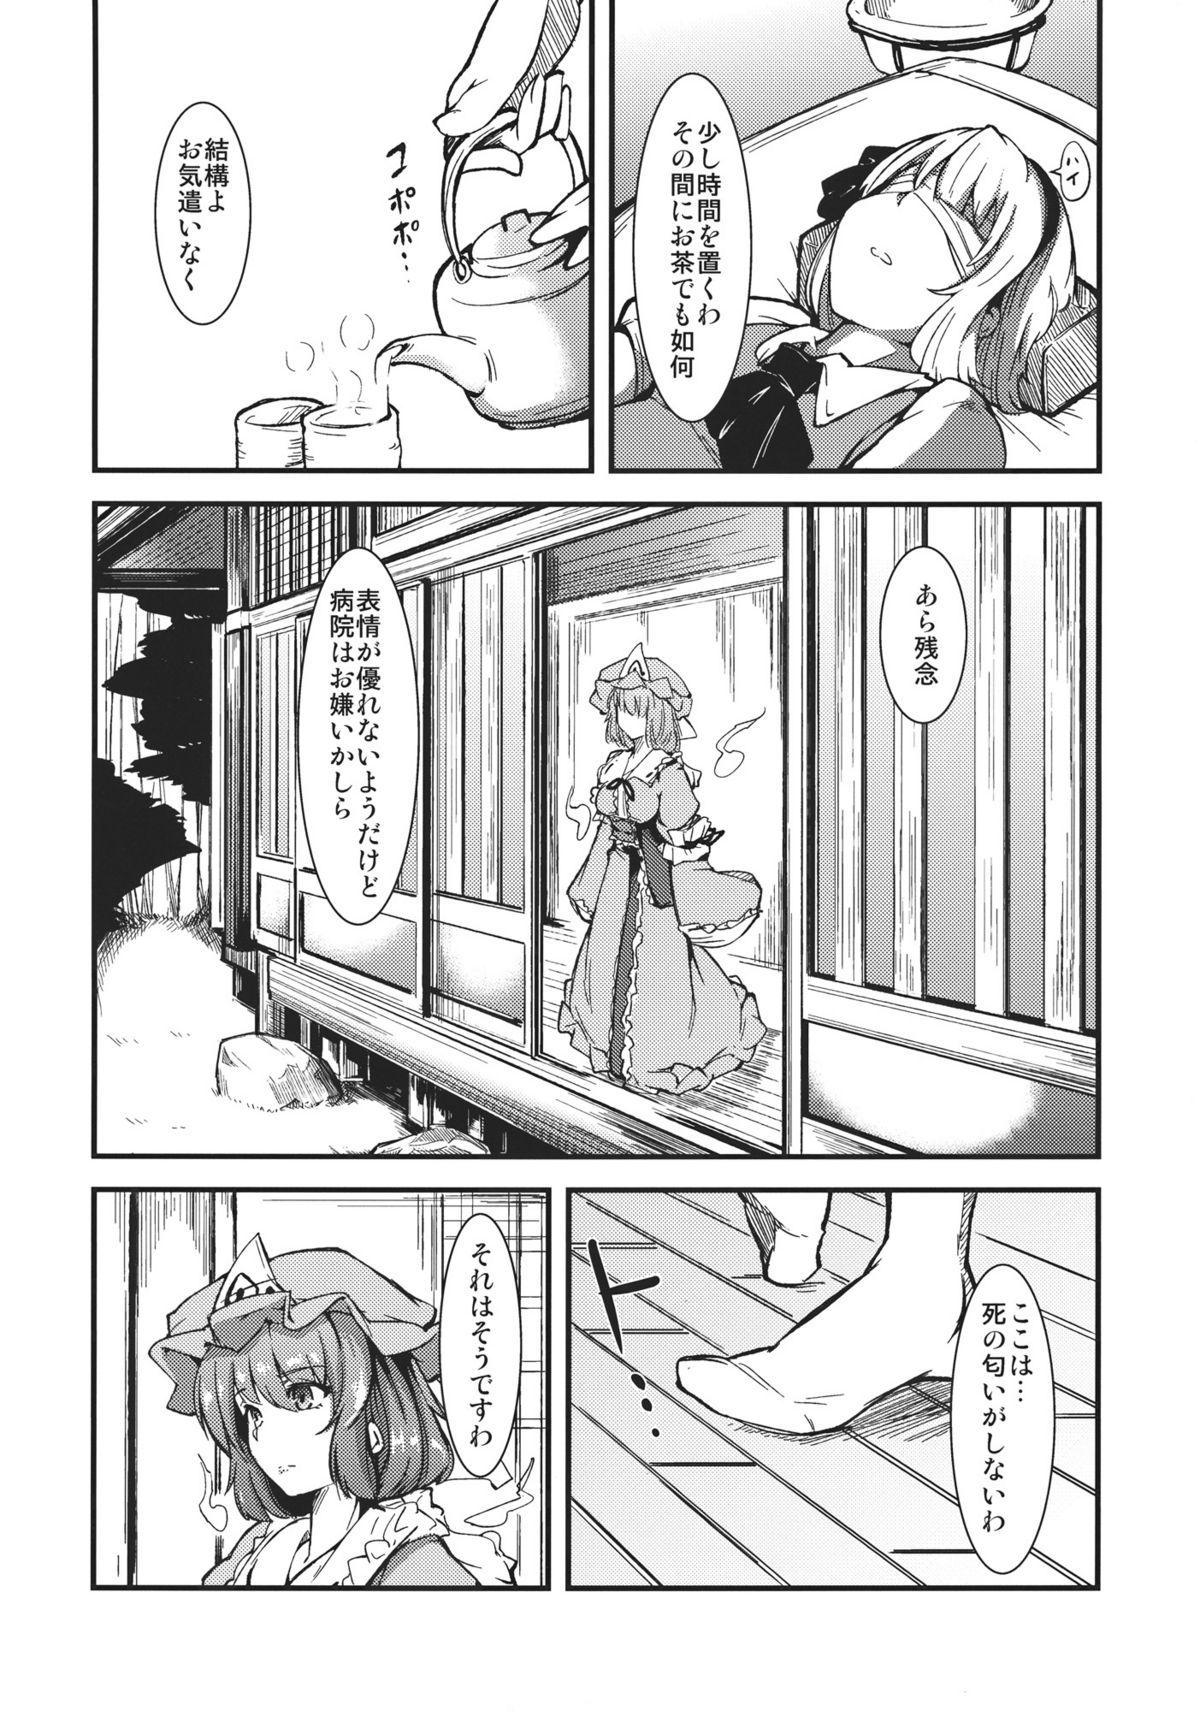 Satin Yuyukan 5 - Touhou project Wet Cunts - Page 4